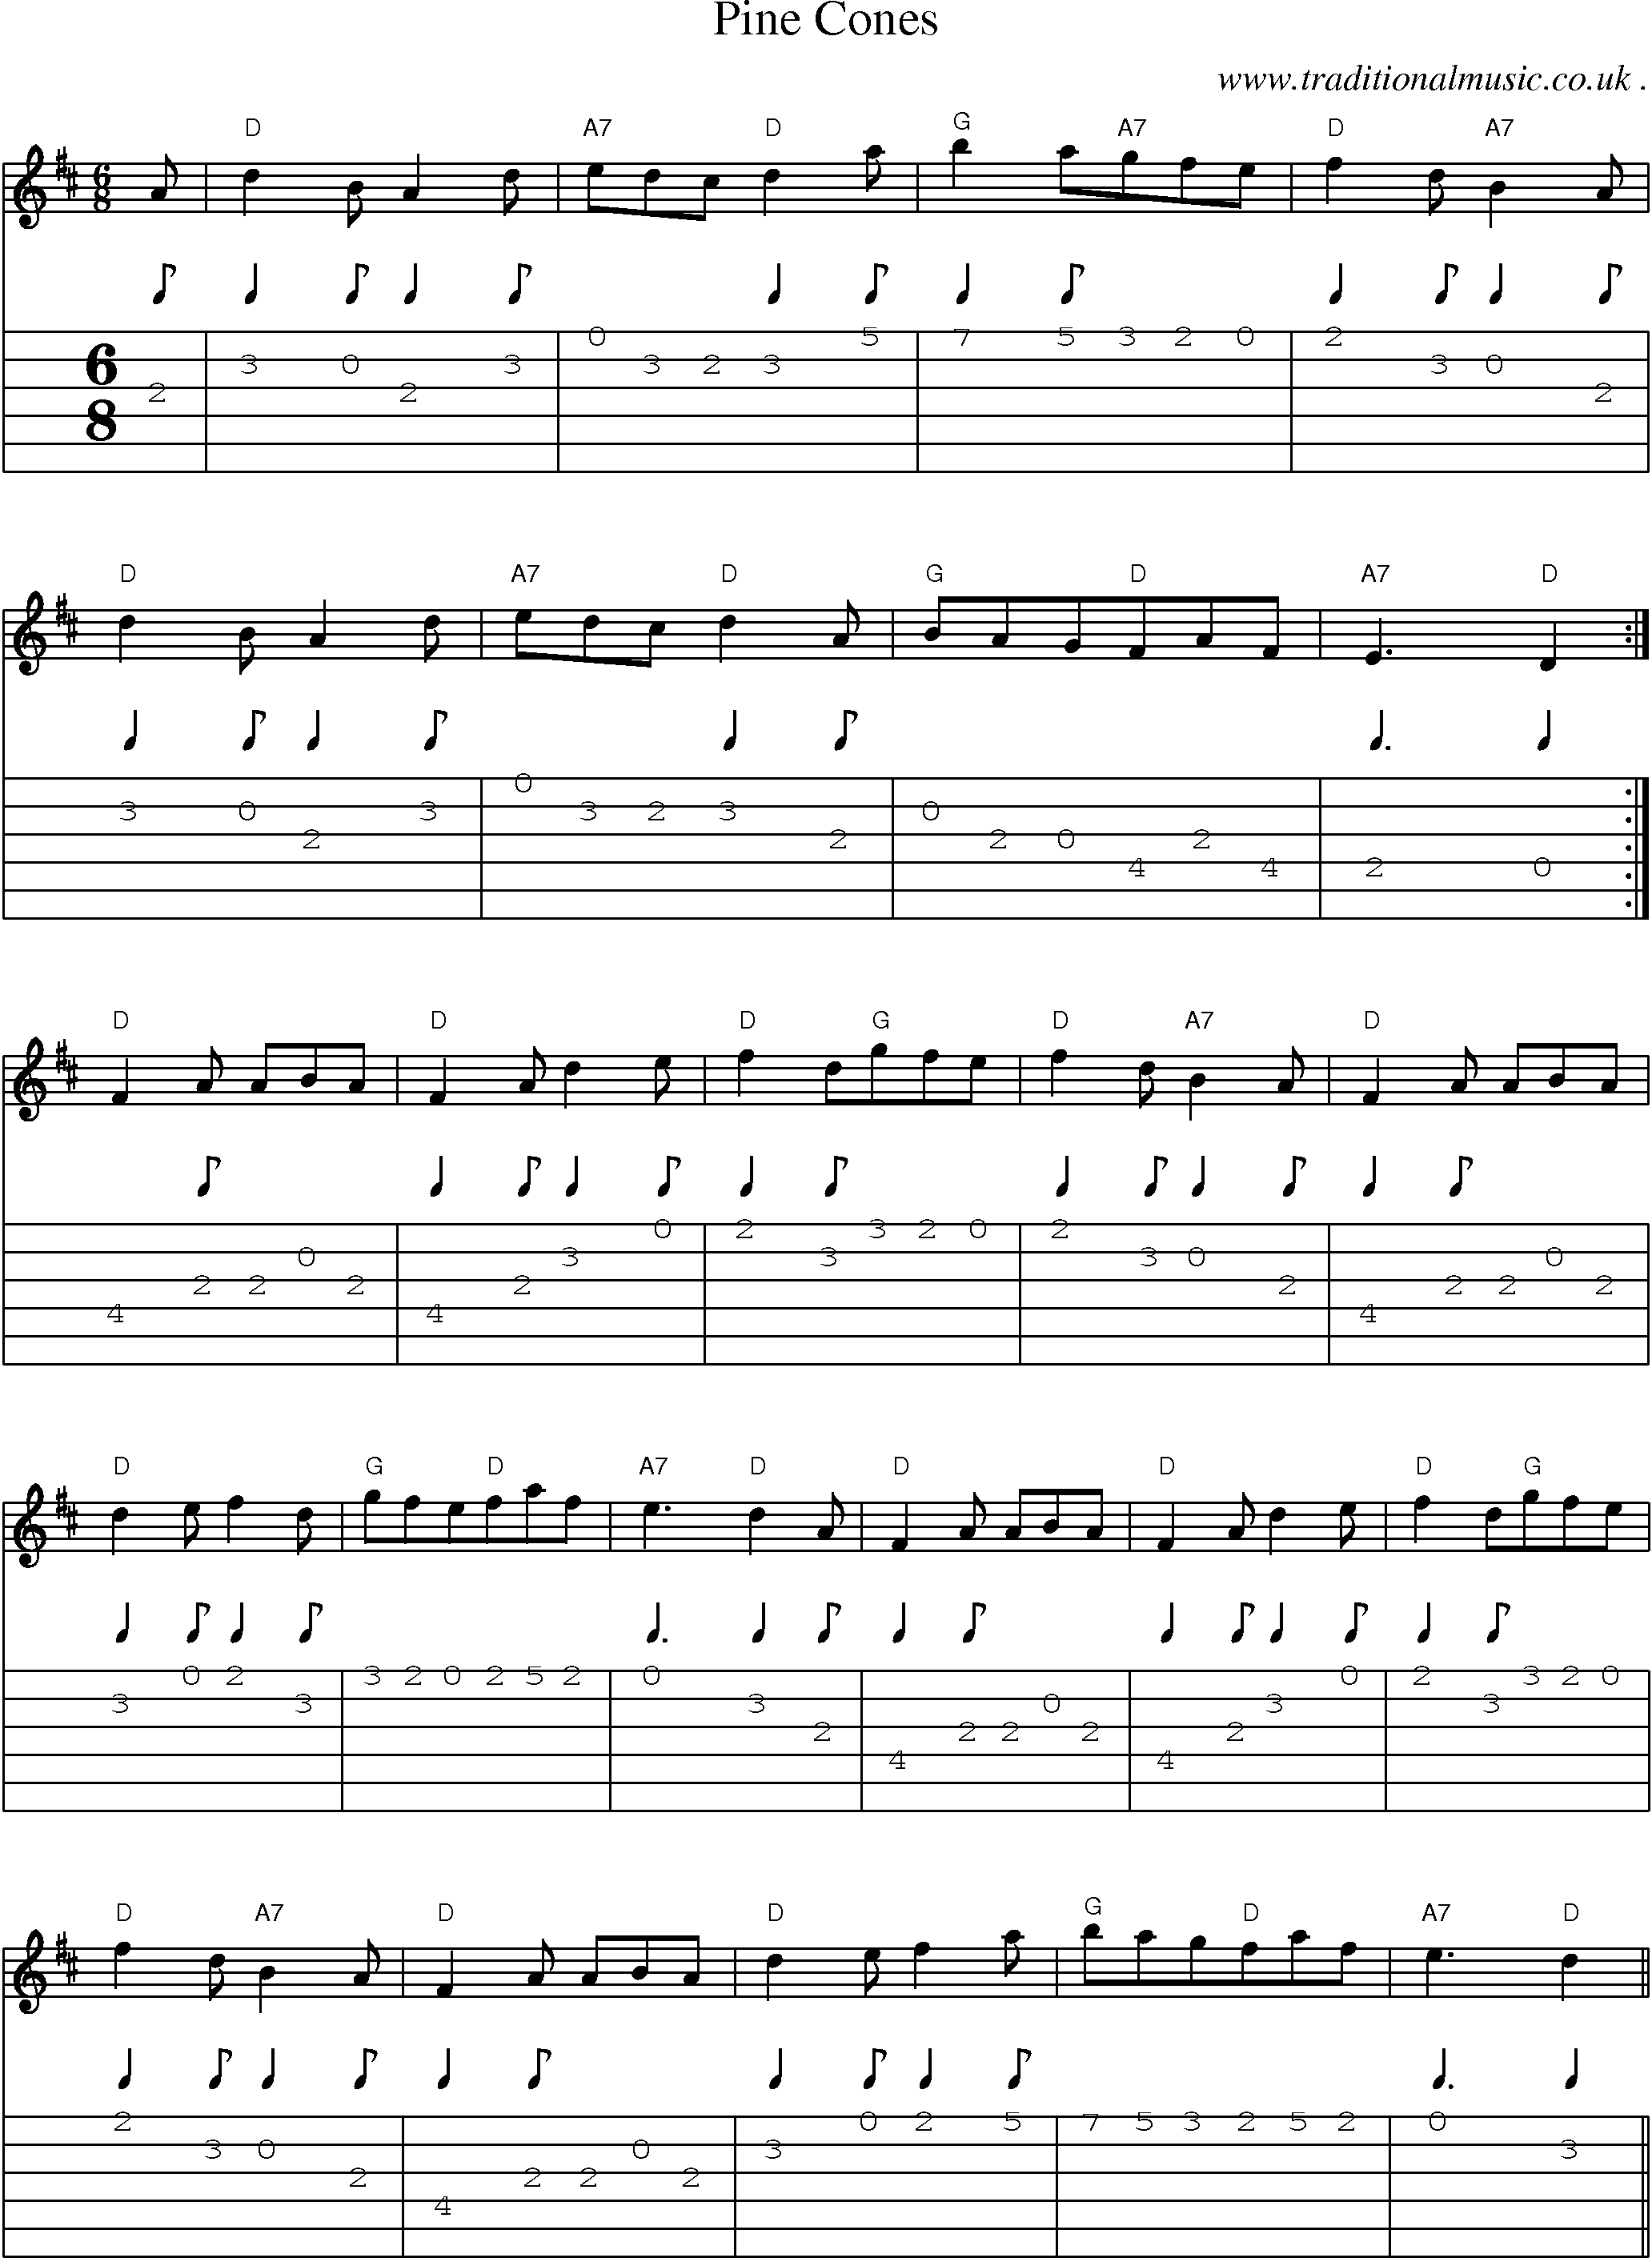 Sheet-Music and Guitar Tabs for Pine Cones